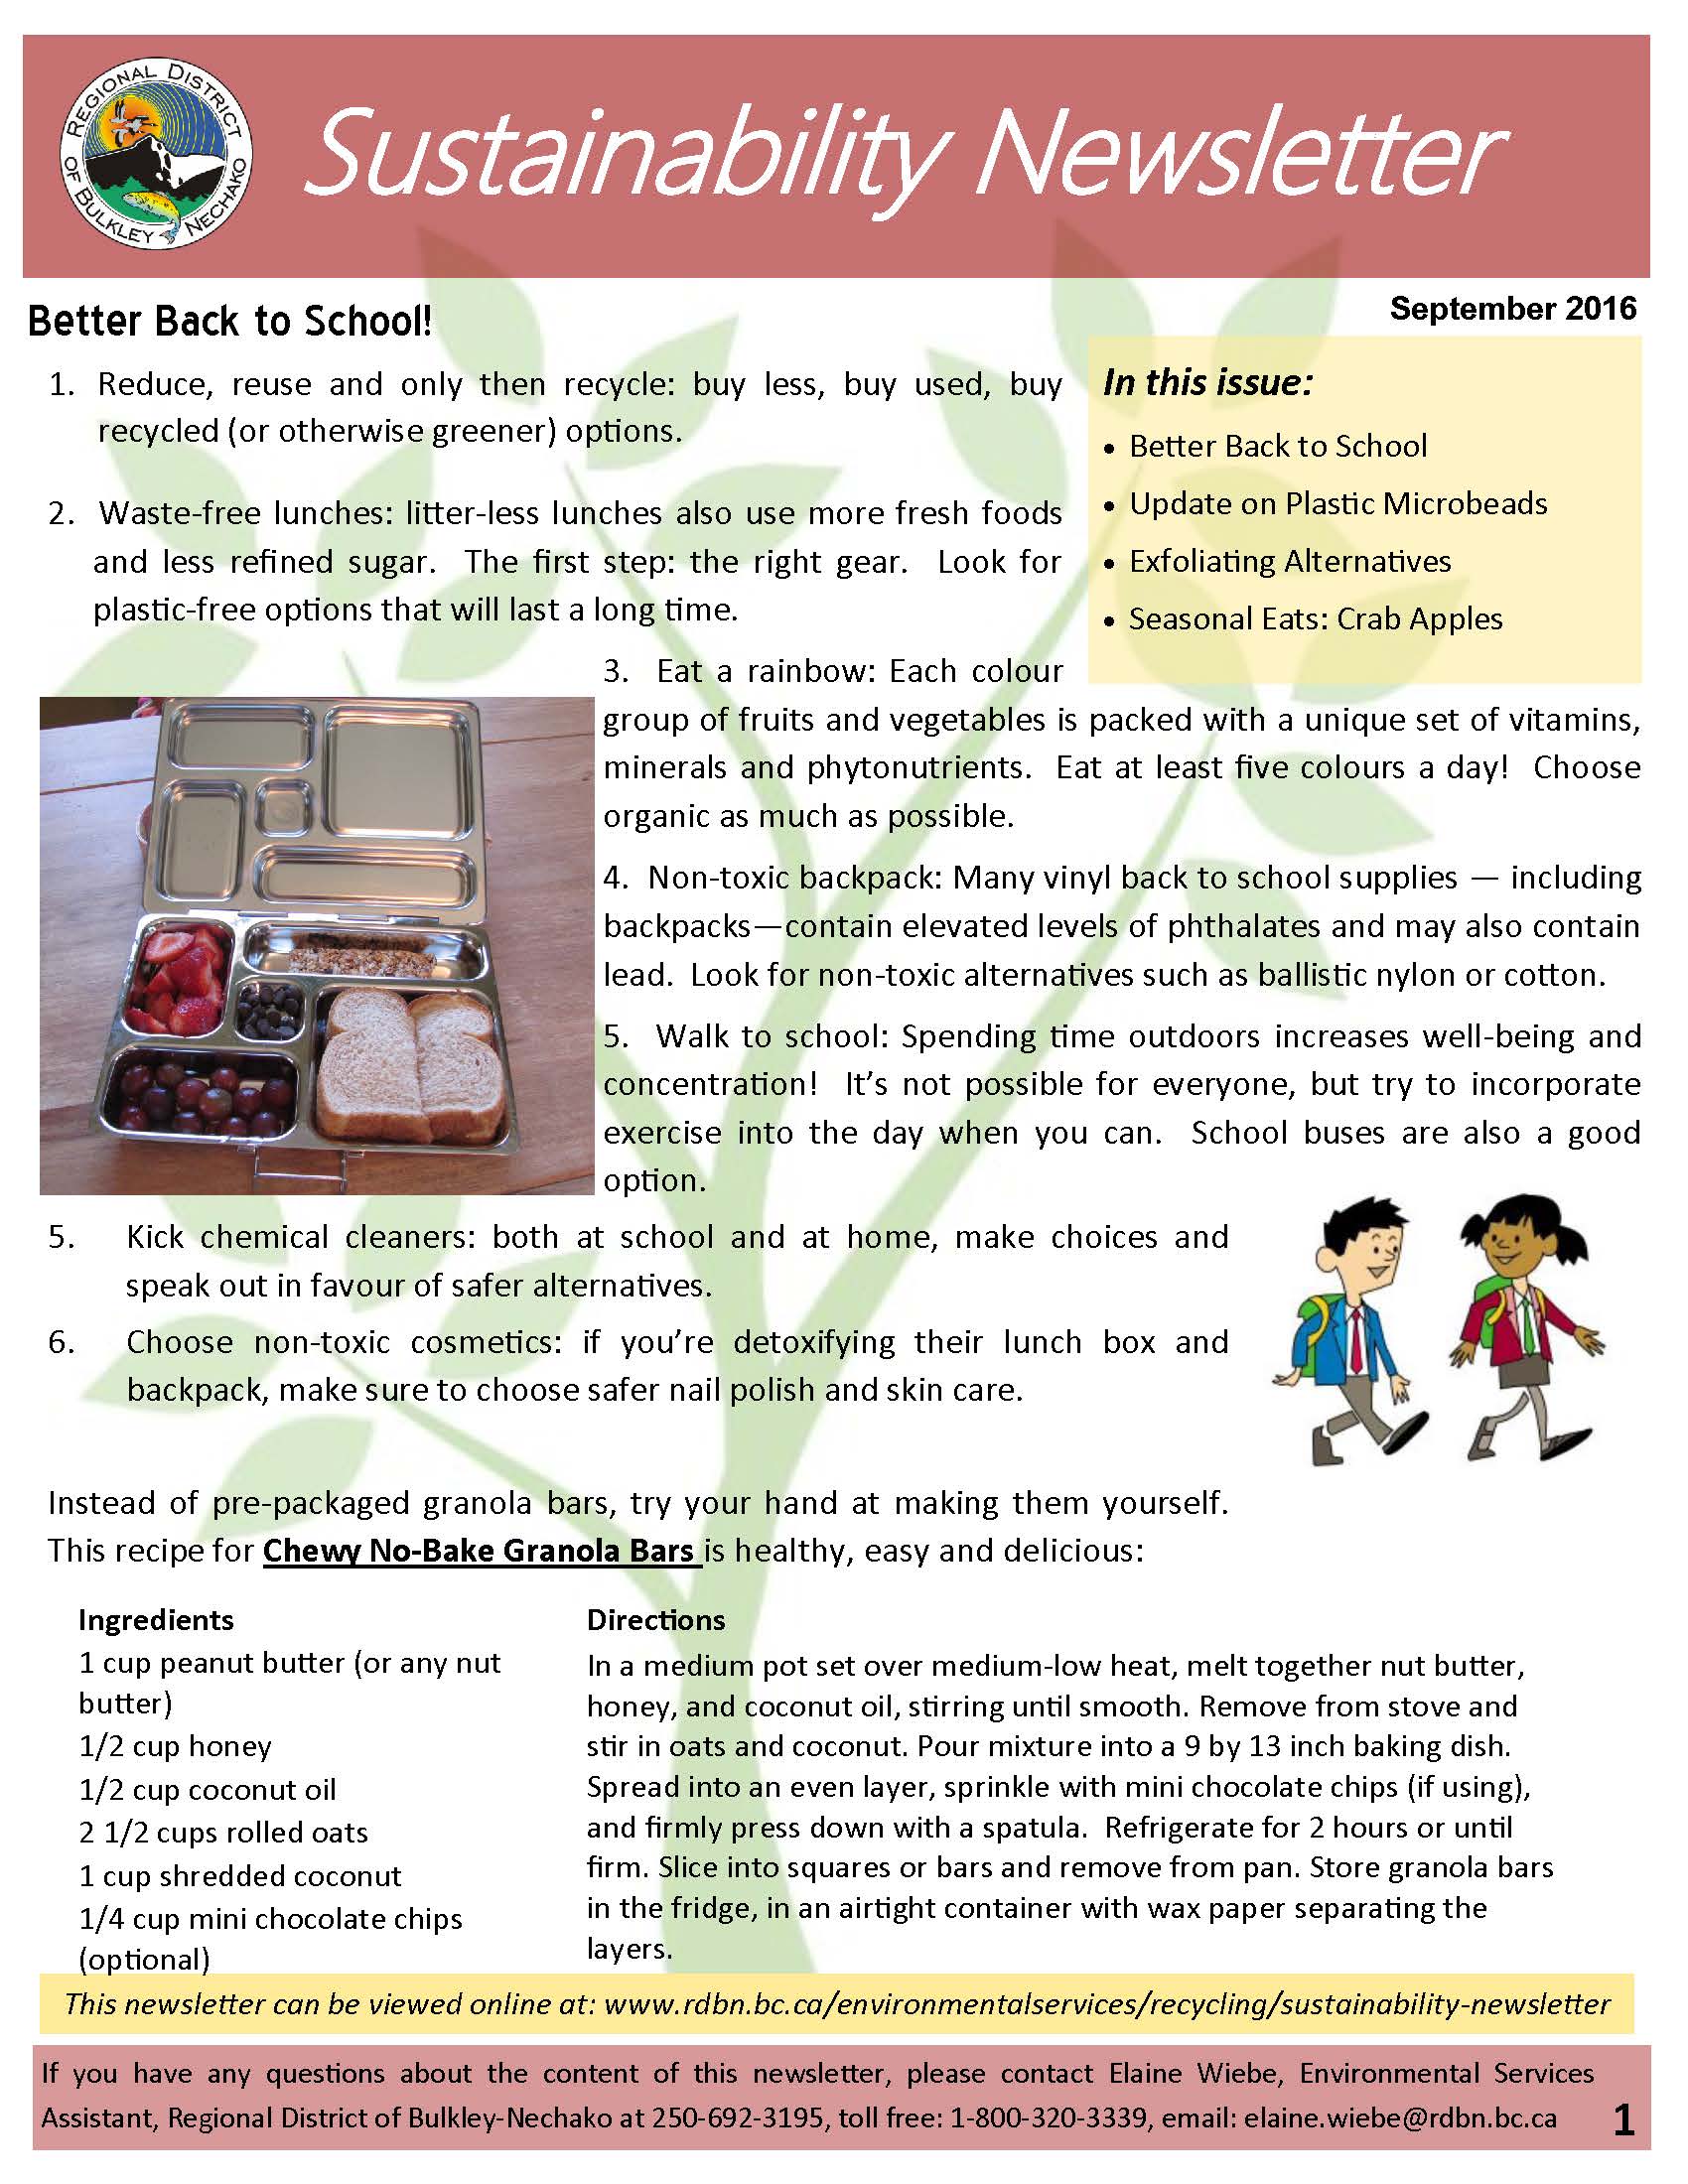 September Sustainability Newsletter 2016 Page 1